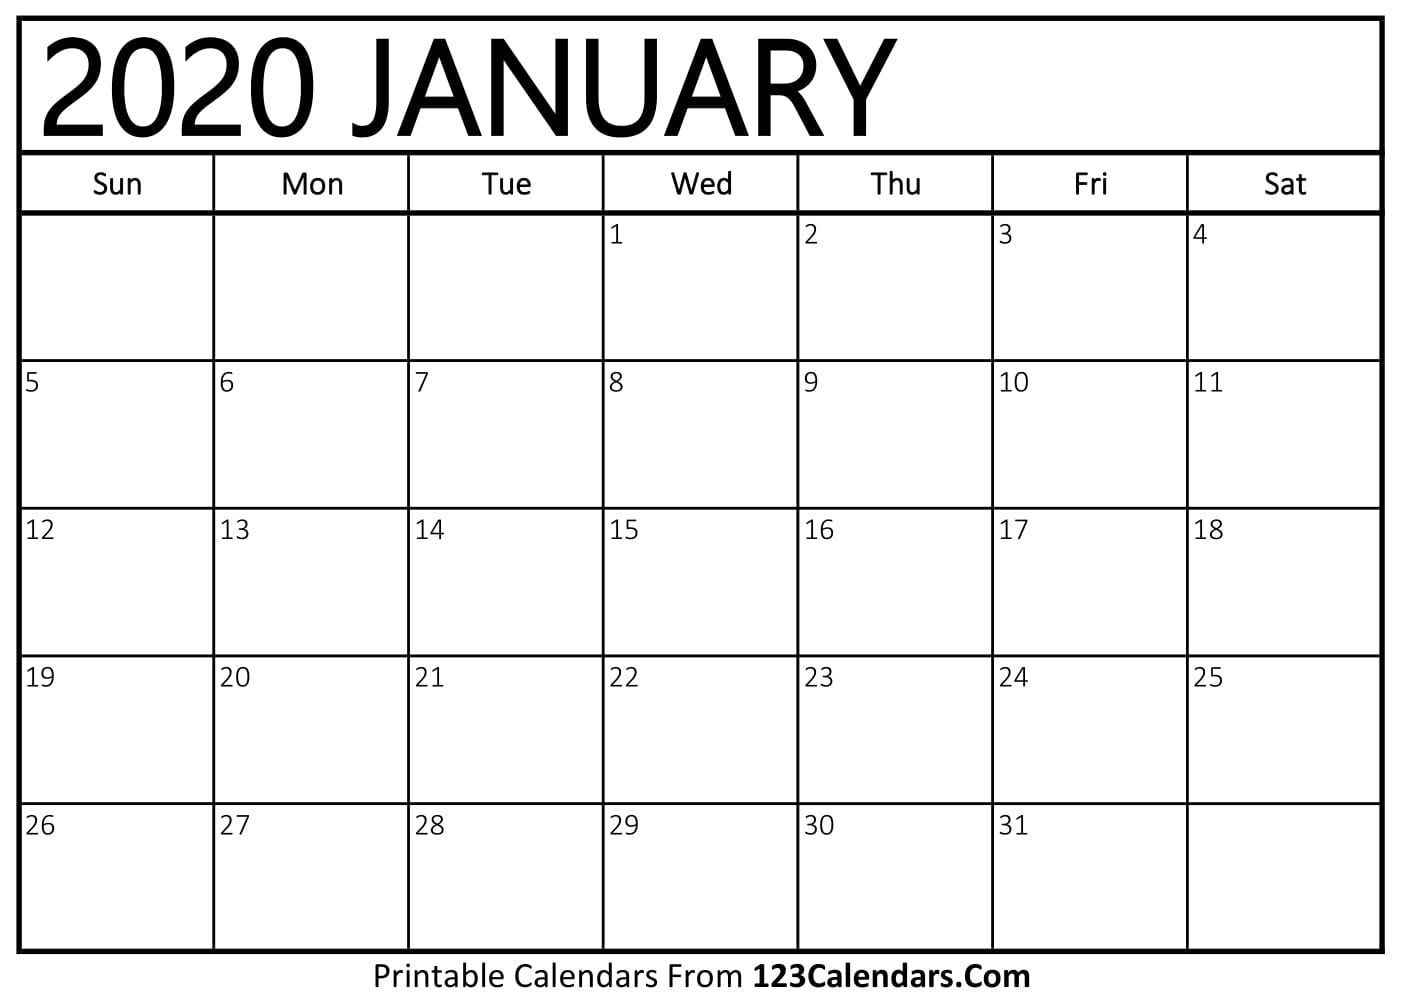 Universal Monthly Calendars You Can Edit | Get Your